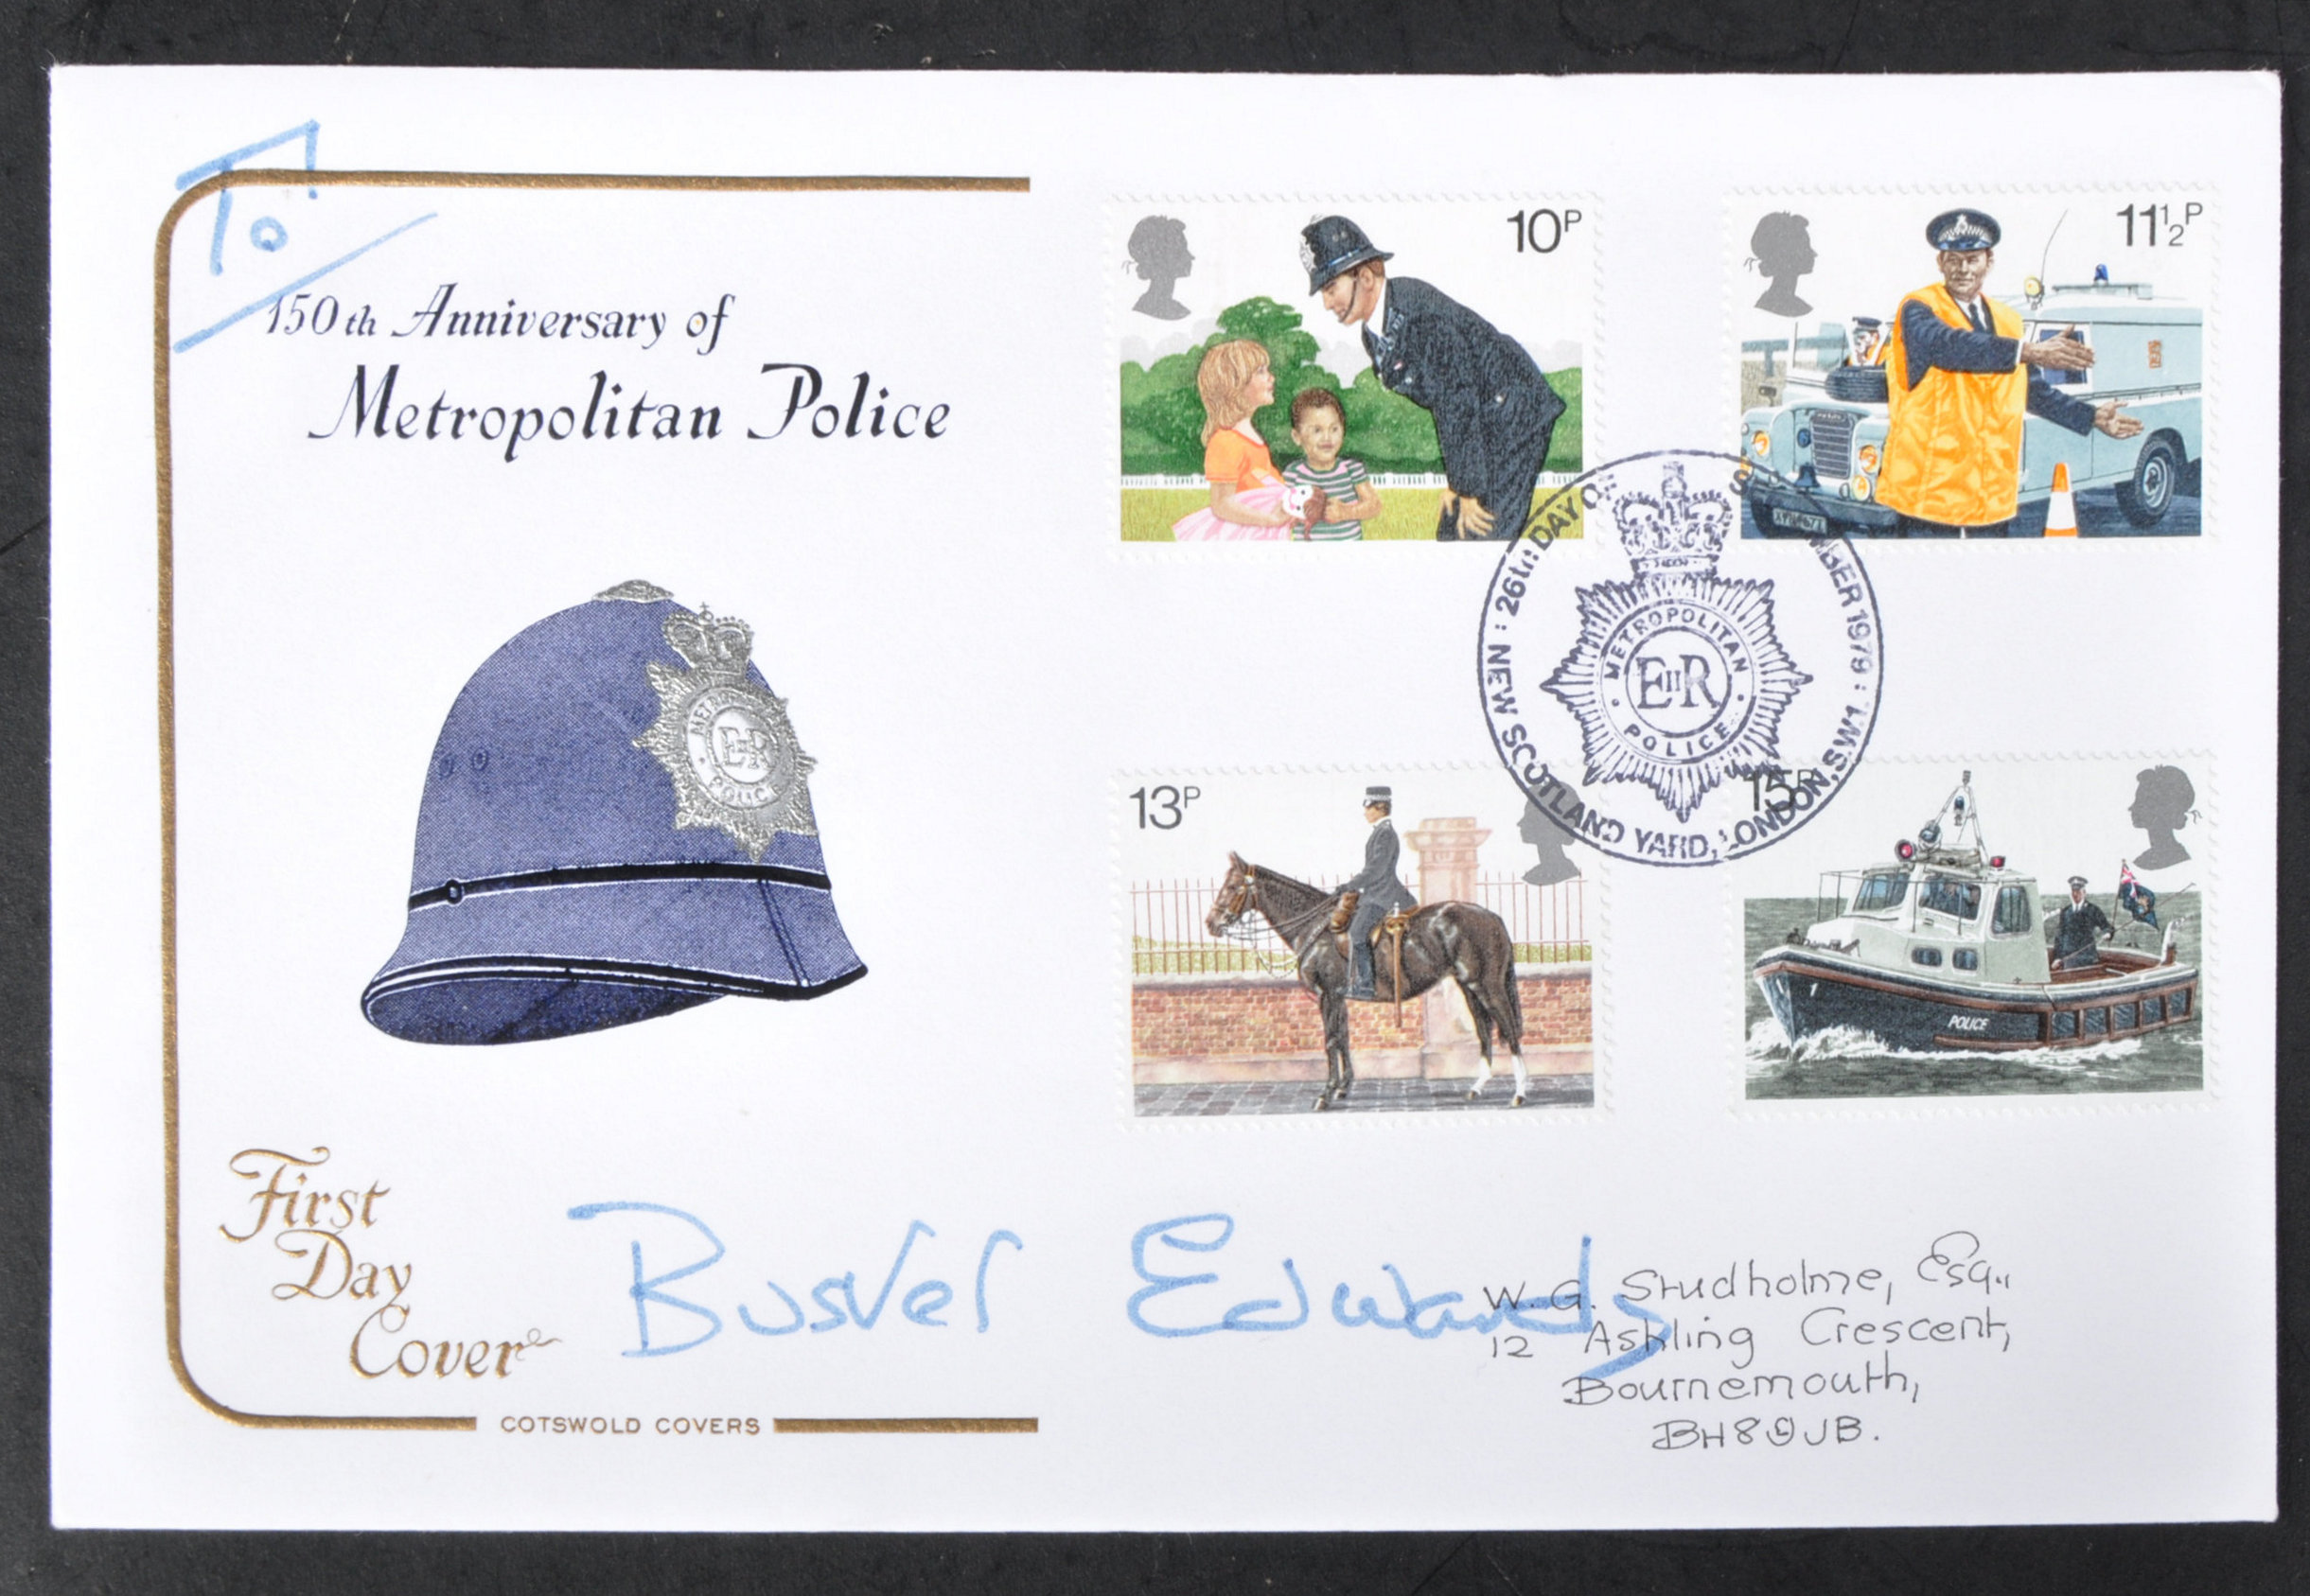 GREAT TRAIN ROBBERY - BUSTER EDWARDS (1931-1994) - SIGNED FDC